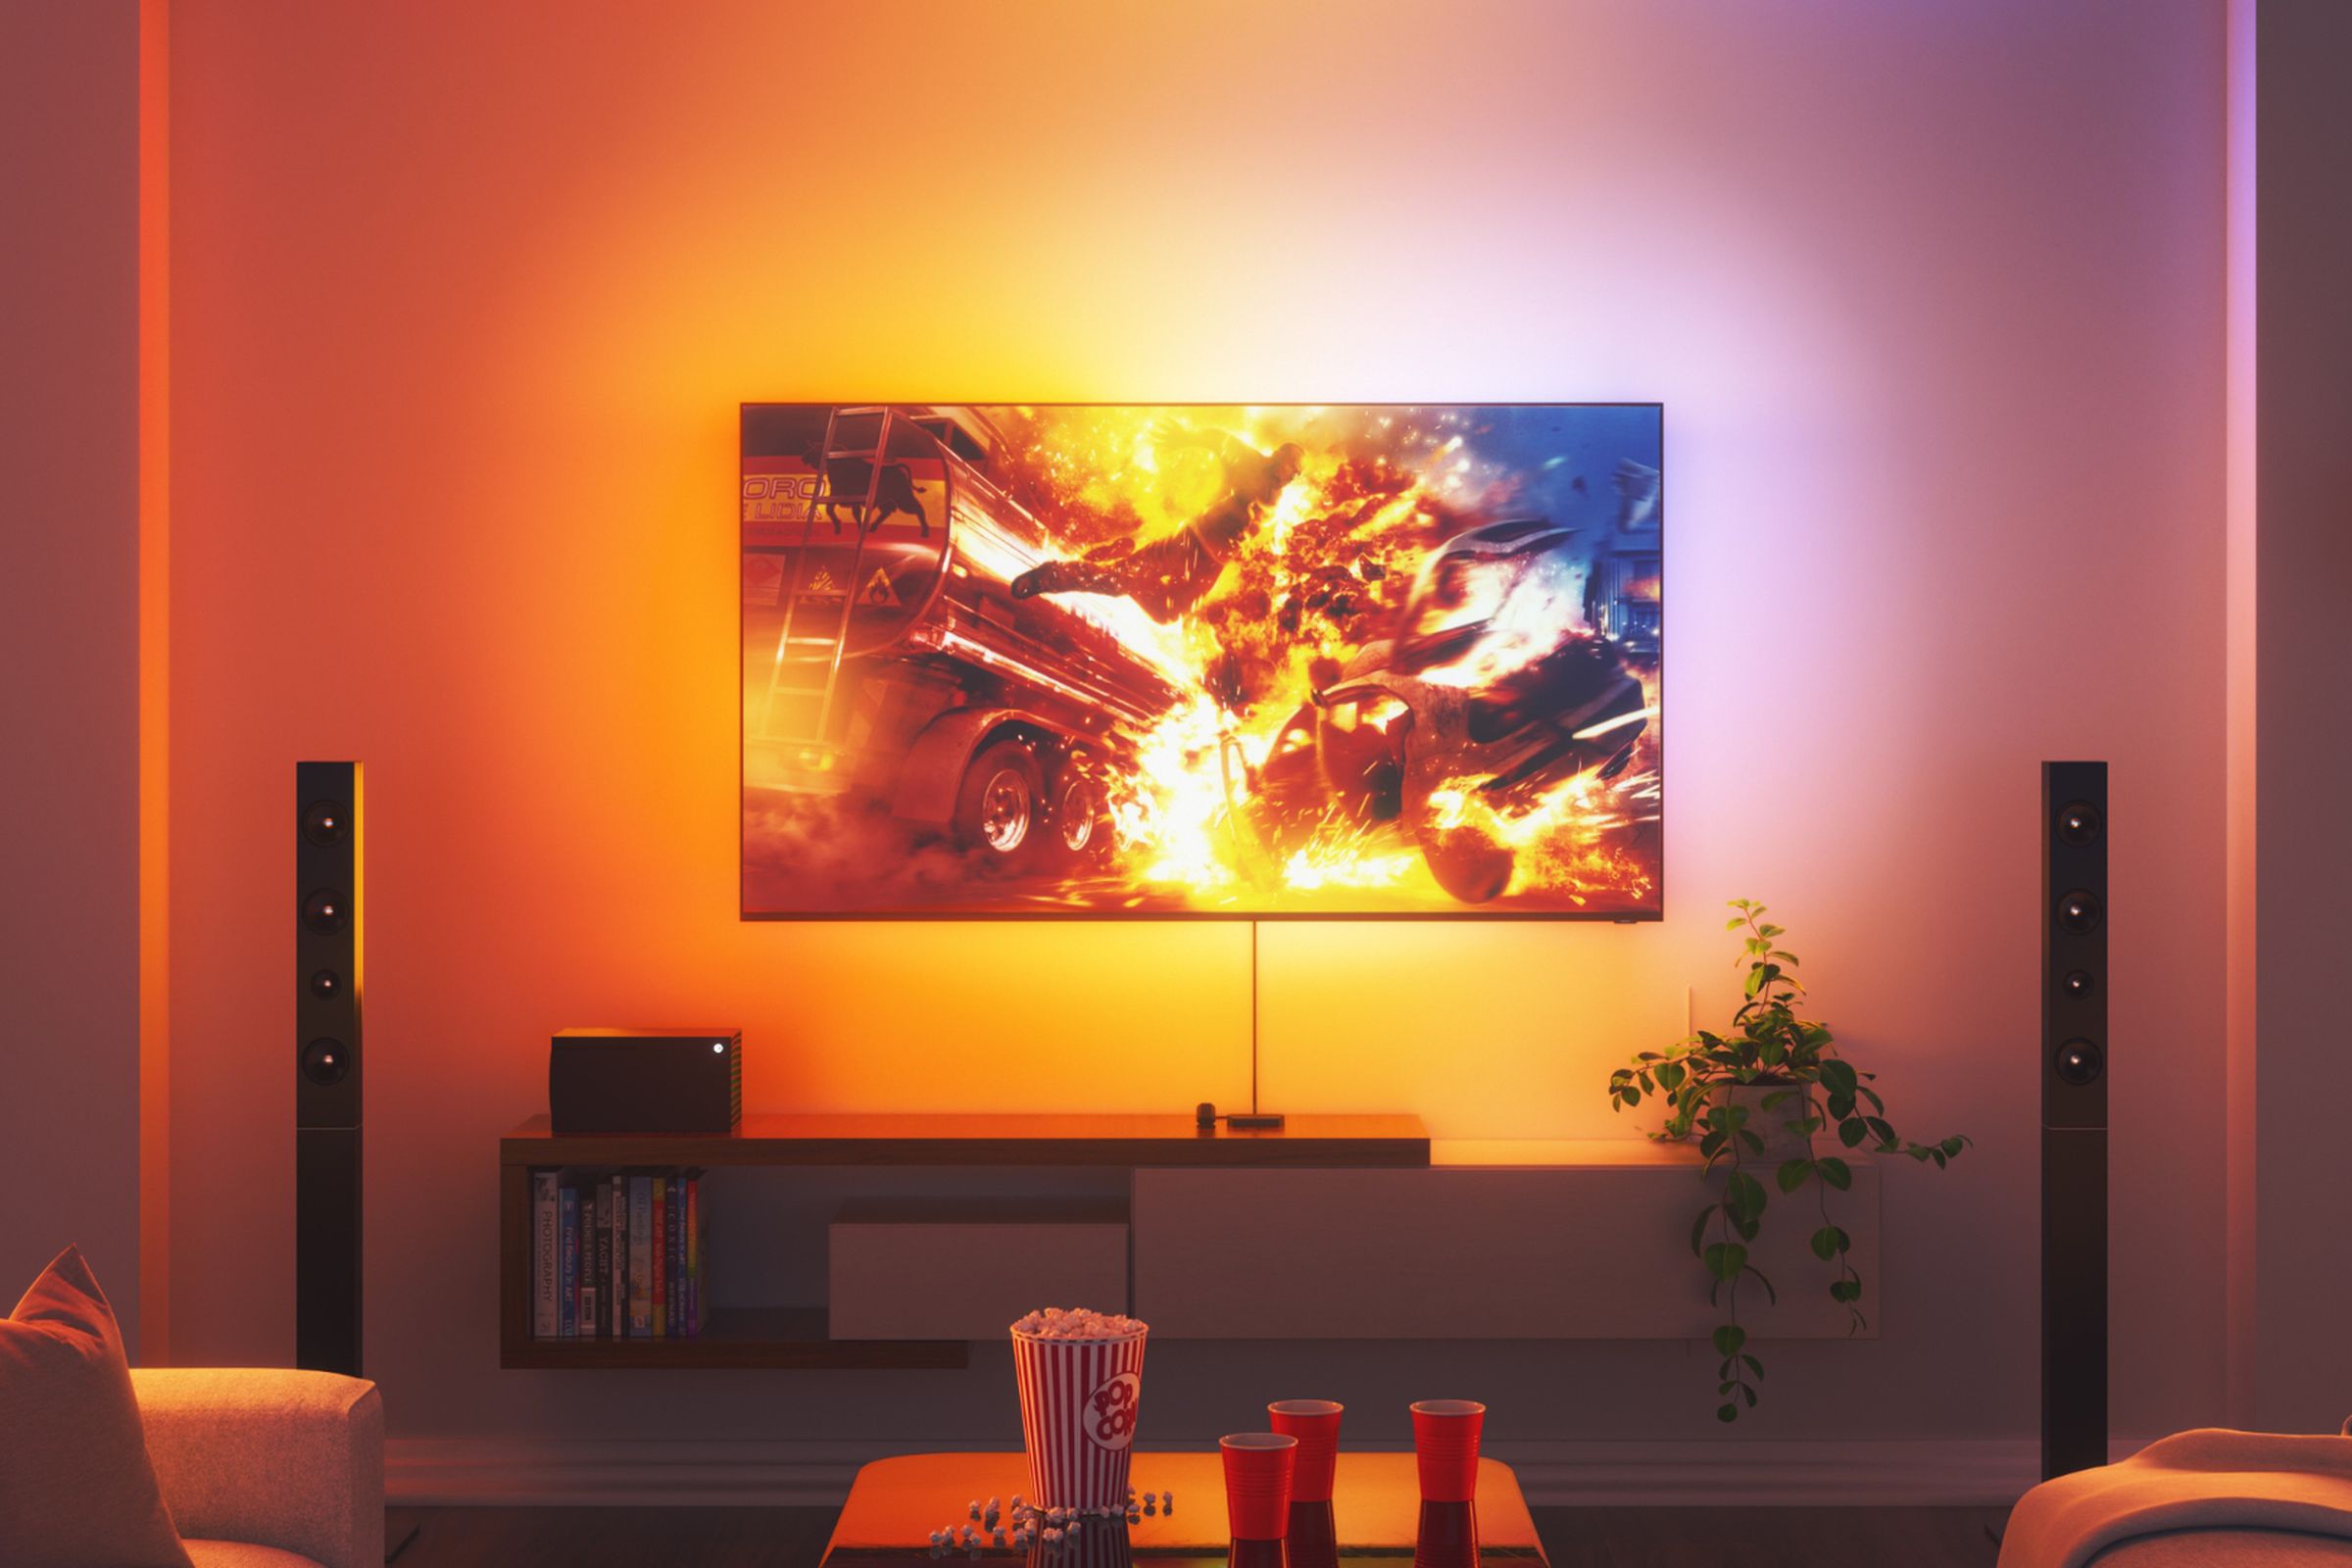 A TV surrounded by colorful light in a modern lounge room.